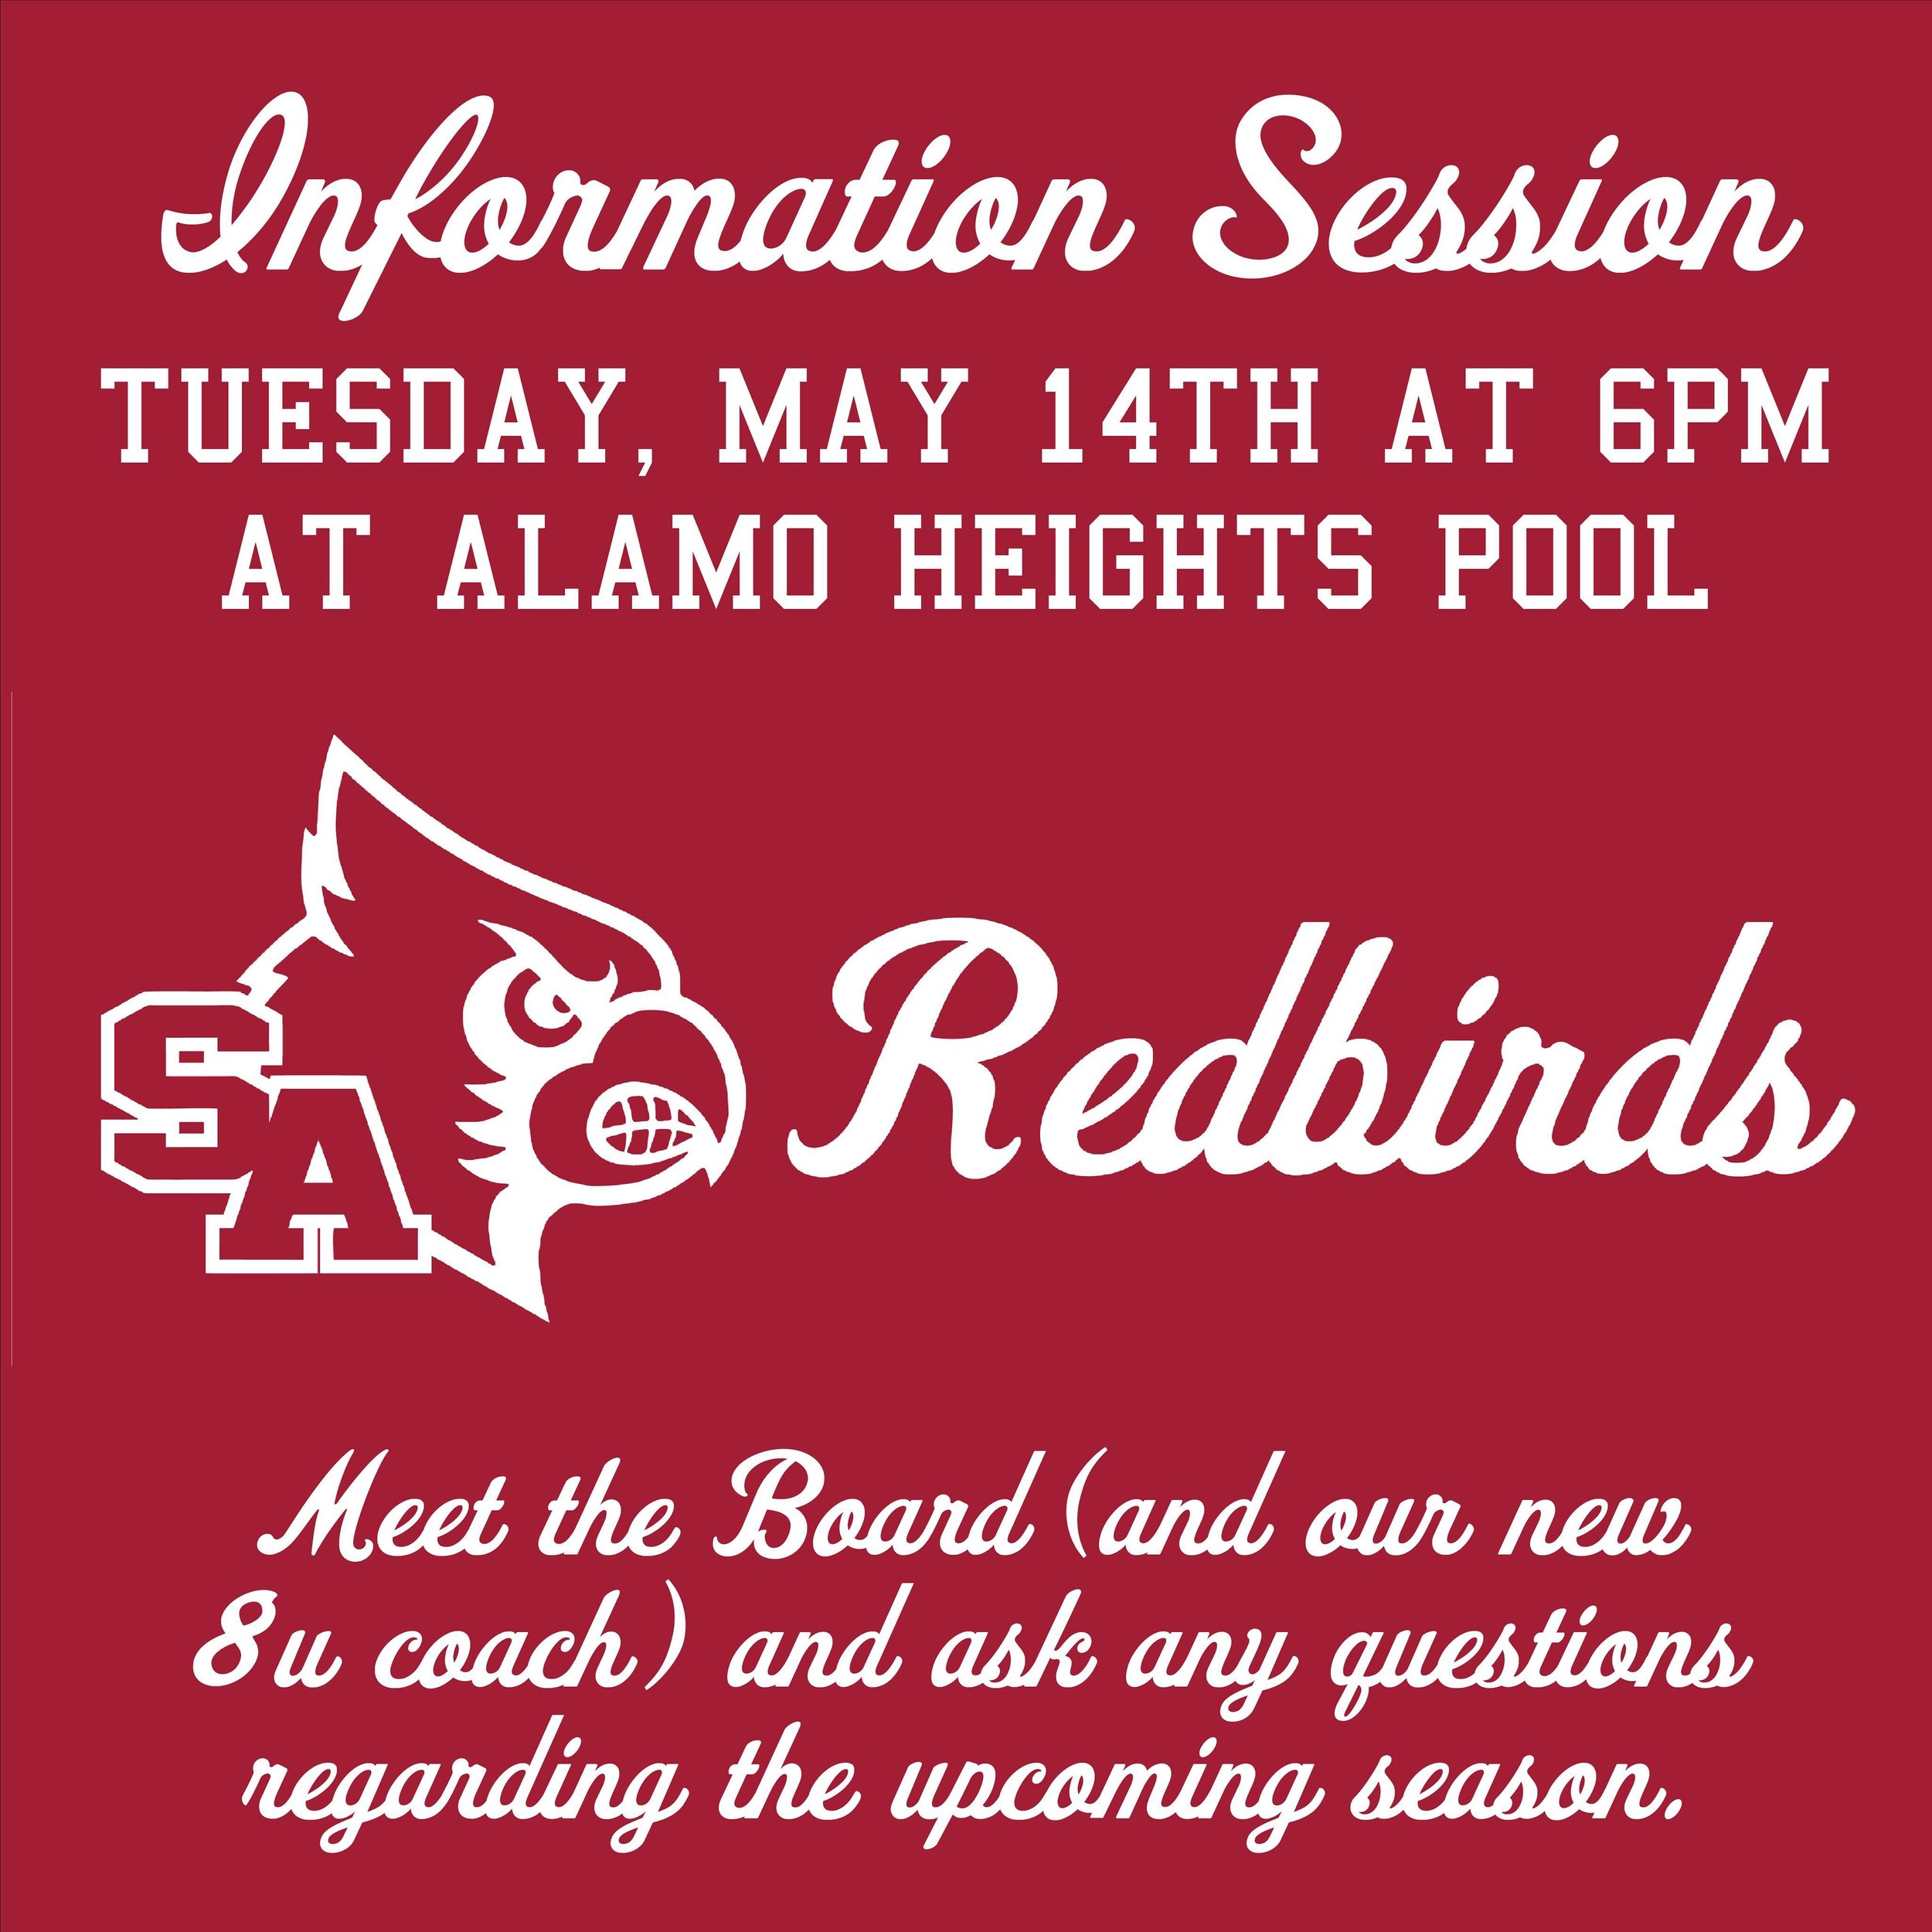 Please join us for a SA Redbirds Information Session on Tuesday, May 14th at 6pm at Alamo Heights Pool. Meet the Board (and our new 8u coach) and ask any questions regarding the upcoming season. We hope to see you there! #saredbirds